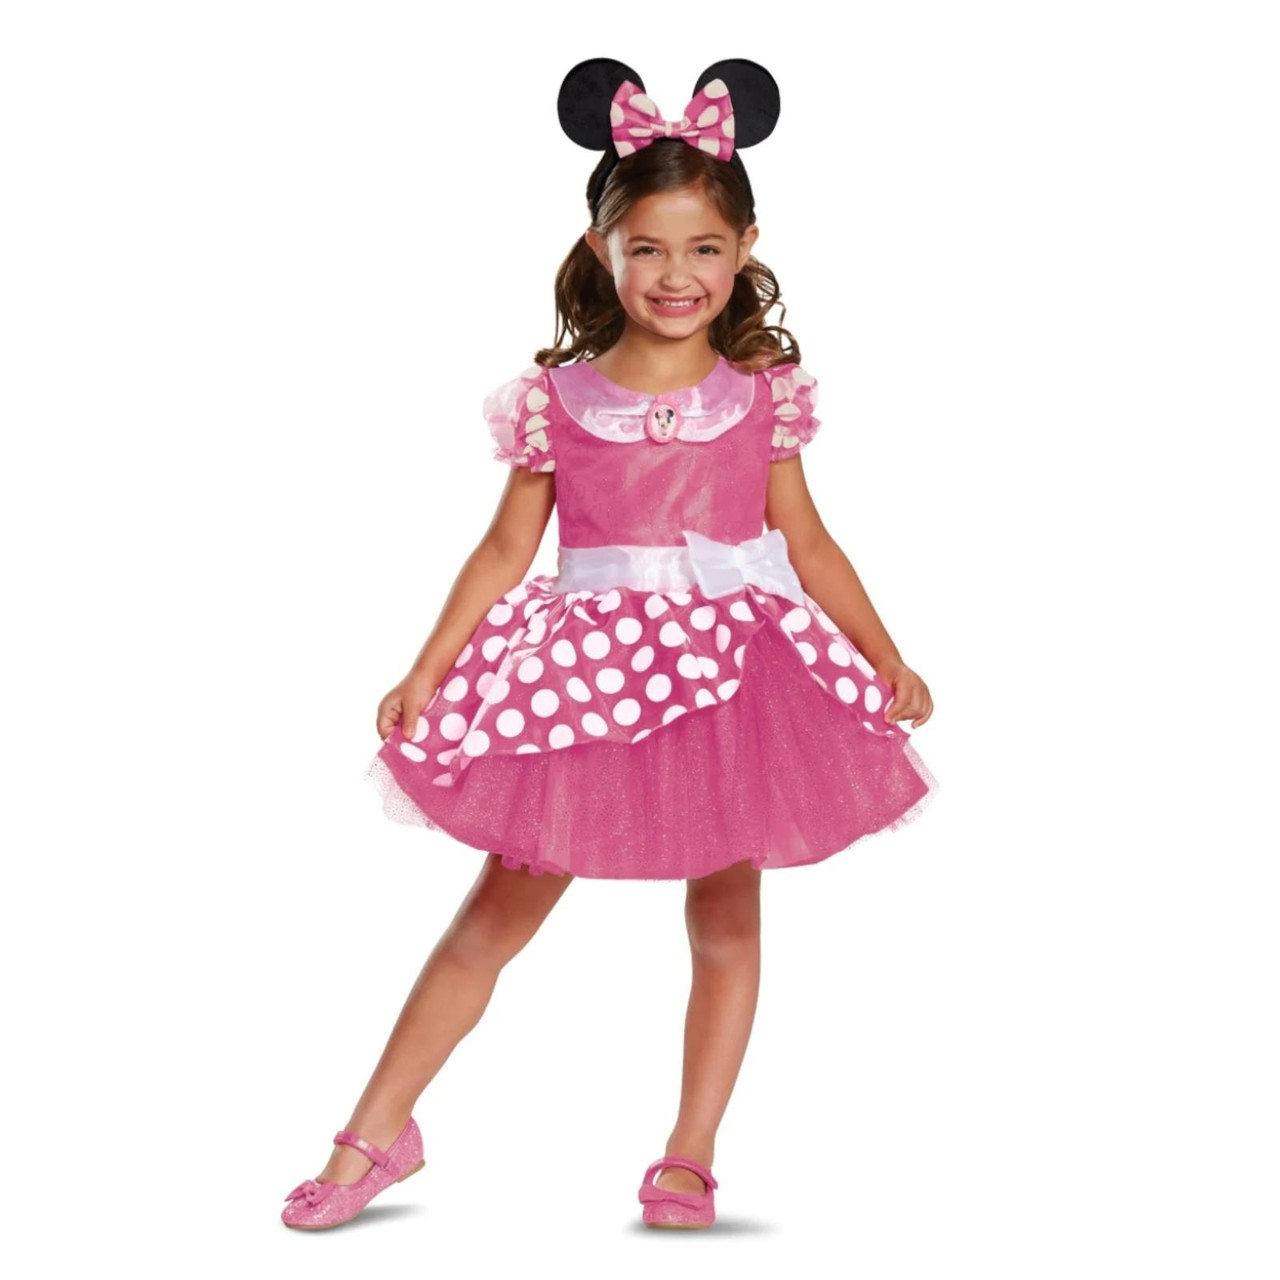 Children's Deluxe Minnie Mouse Costume